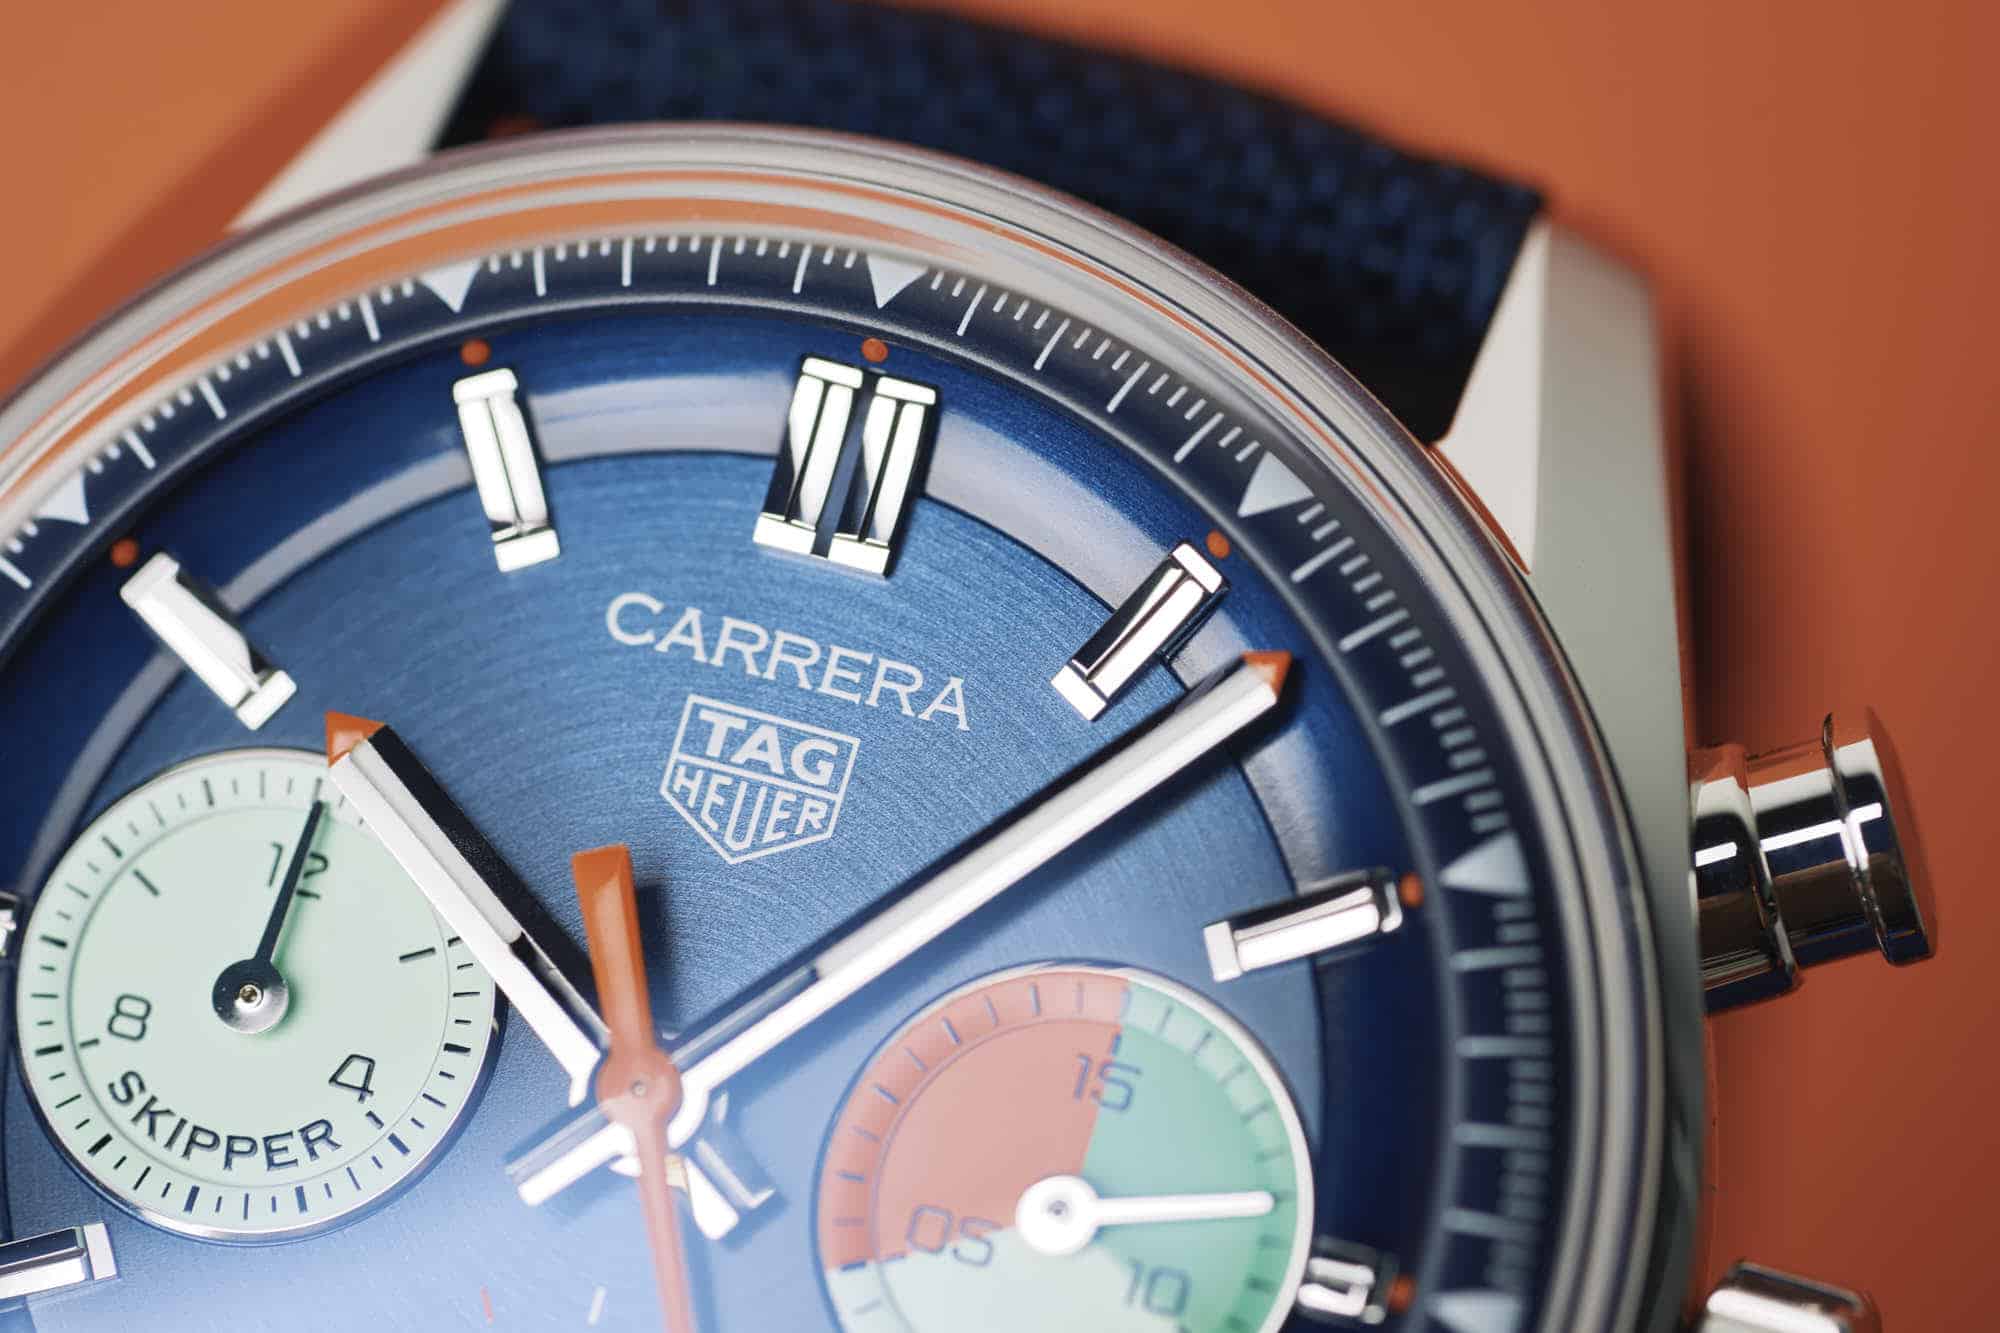 Hands-On: The New TAG Heuer Carrera Skipper Chronograph